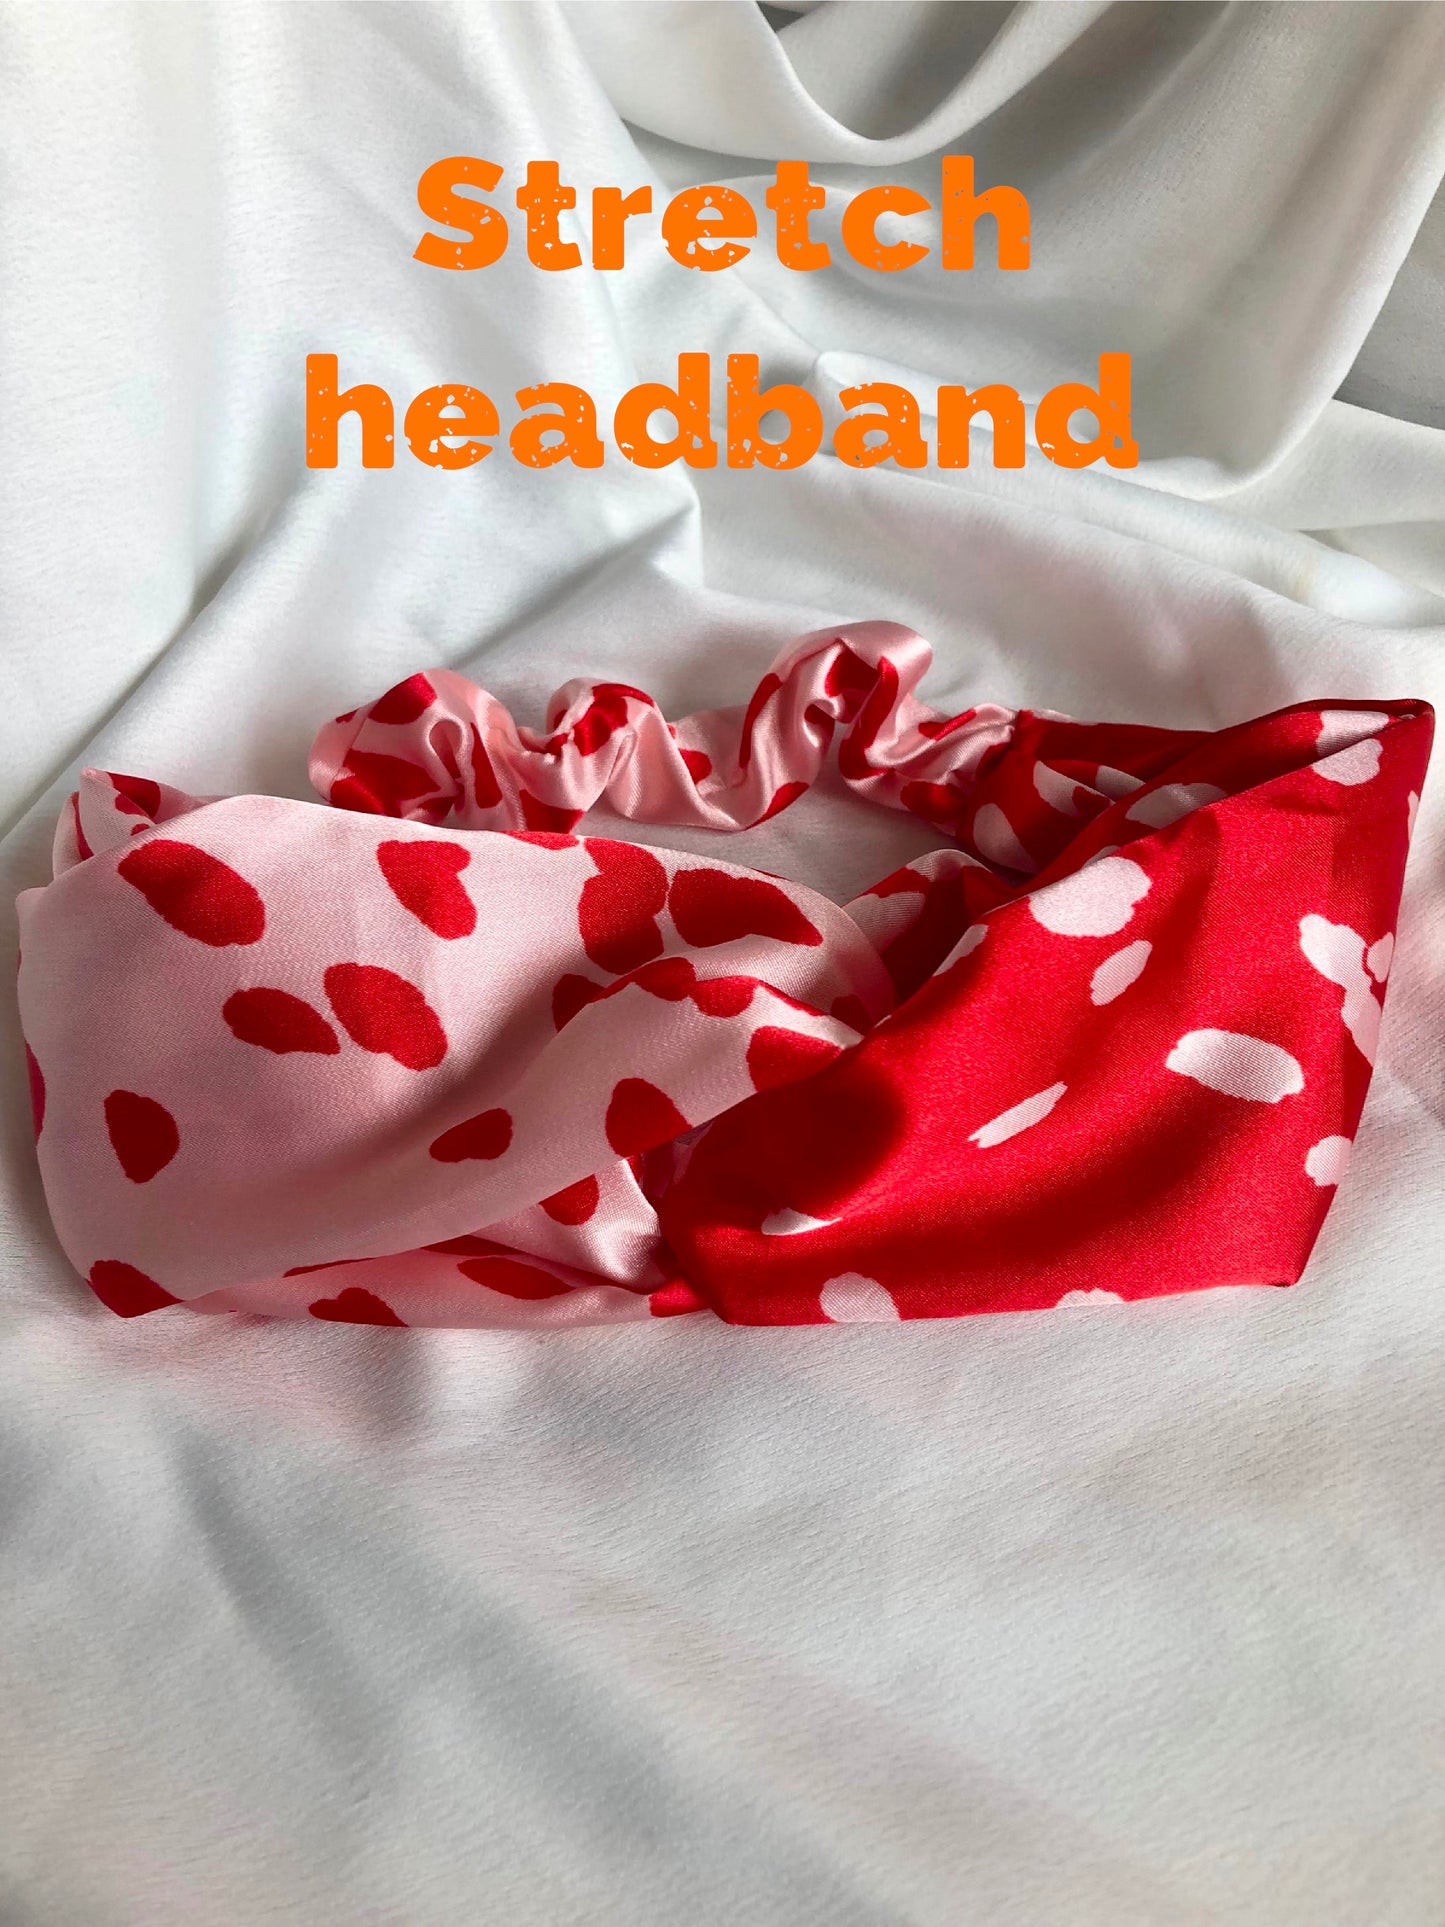 Red Winter Berries Cotton Hair Band - choose style